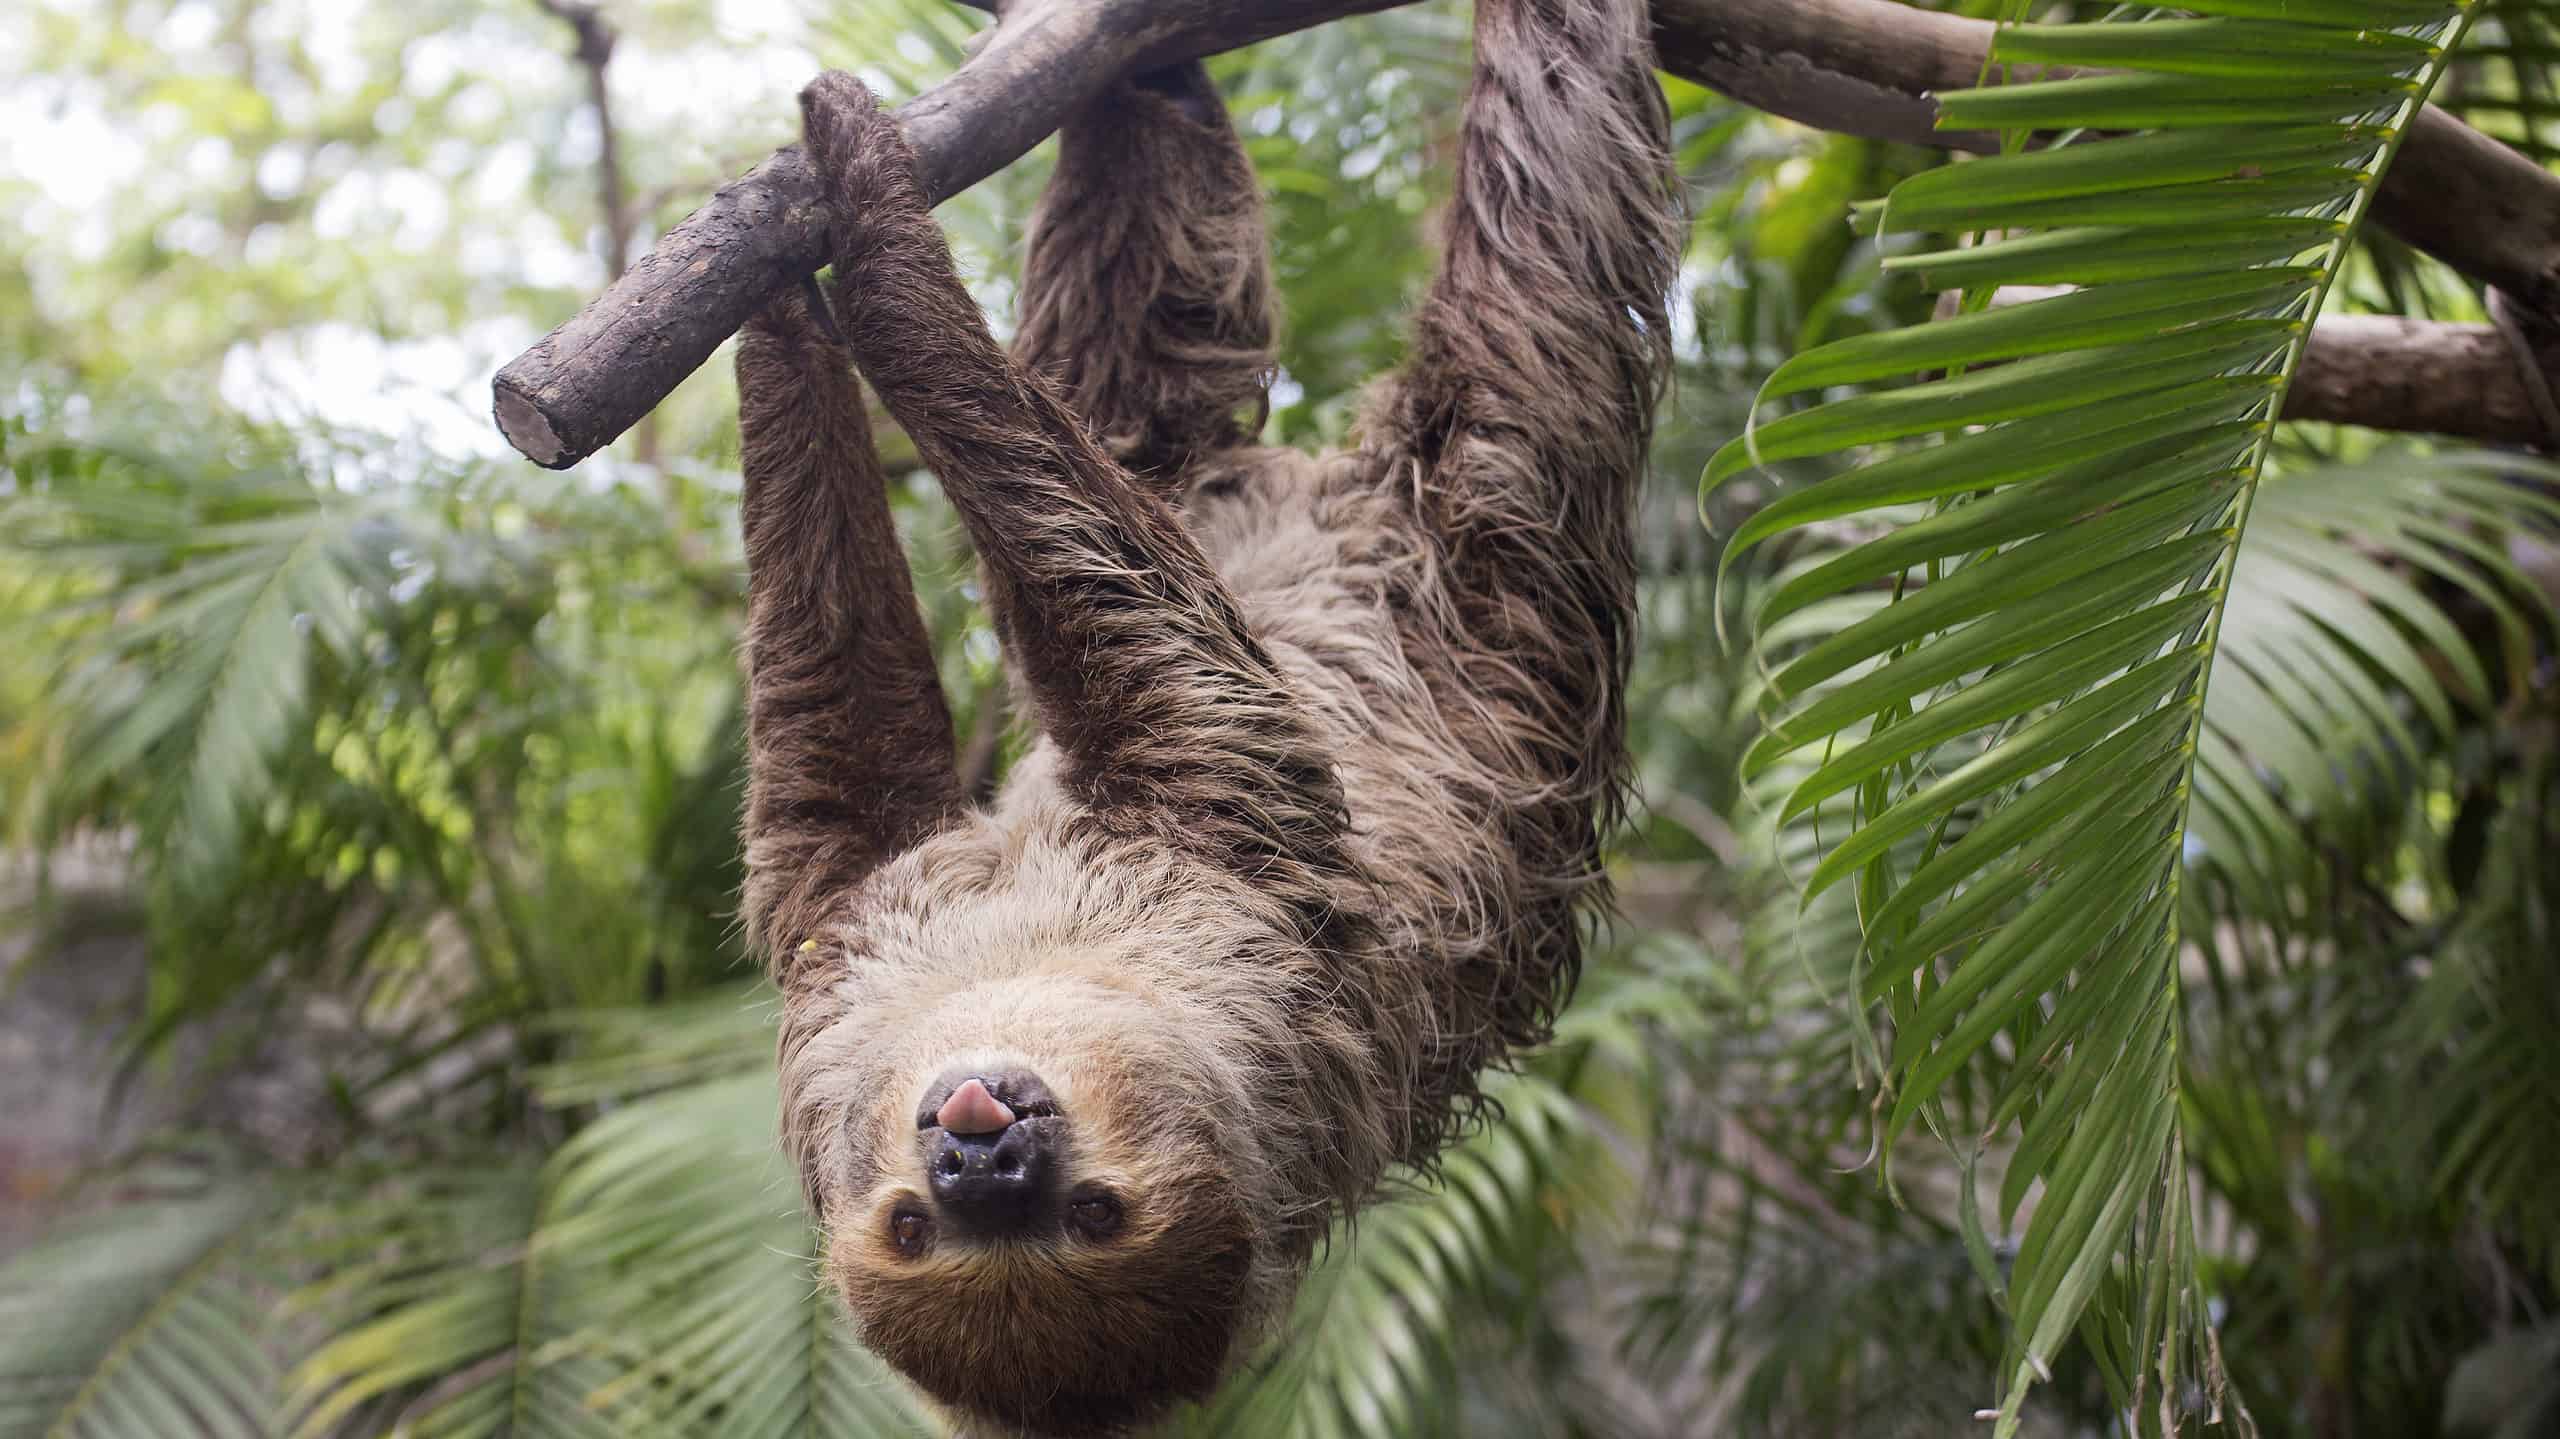 There are zoos all over the U.S. where you can "hang" with sloths!